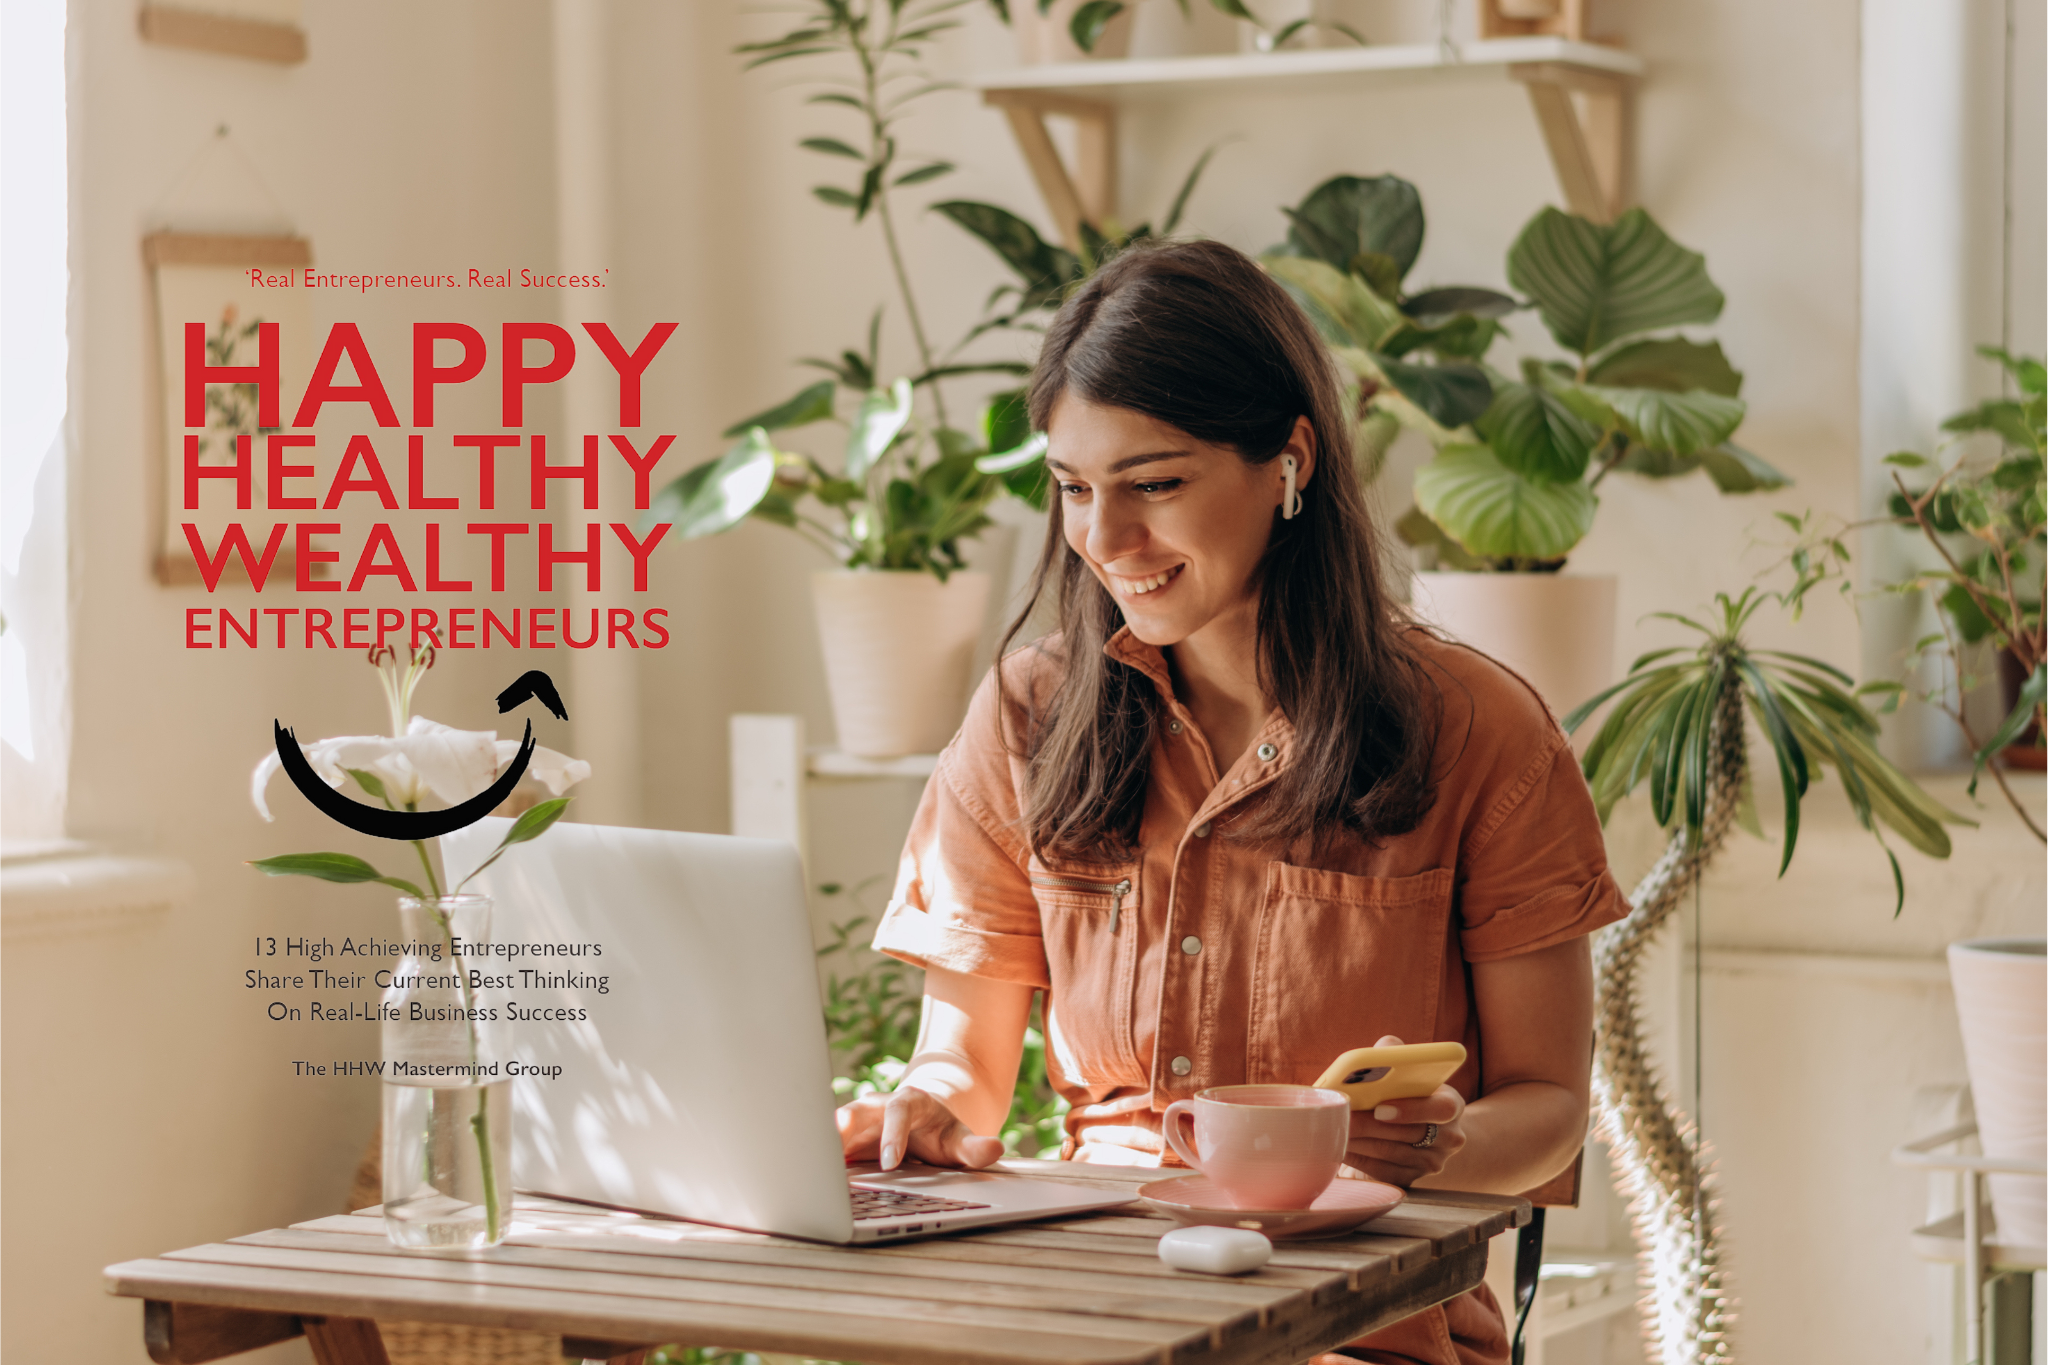 A review of Happy Healthy Wealthy Entrepreneurs by The HHW Mastermind Group